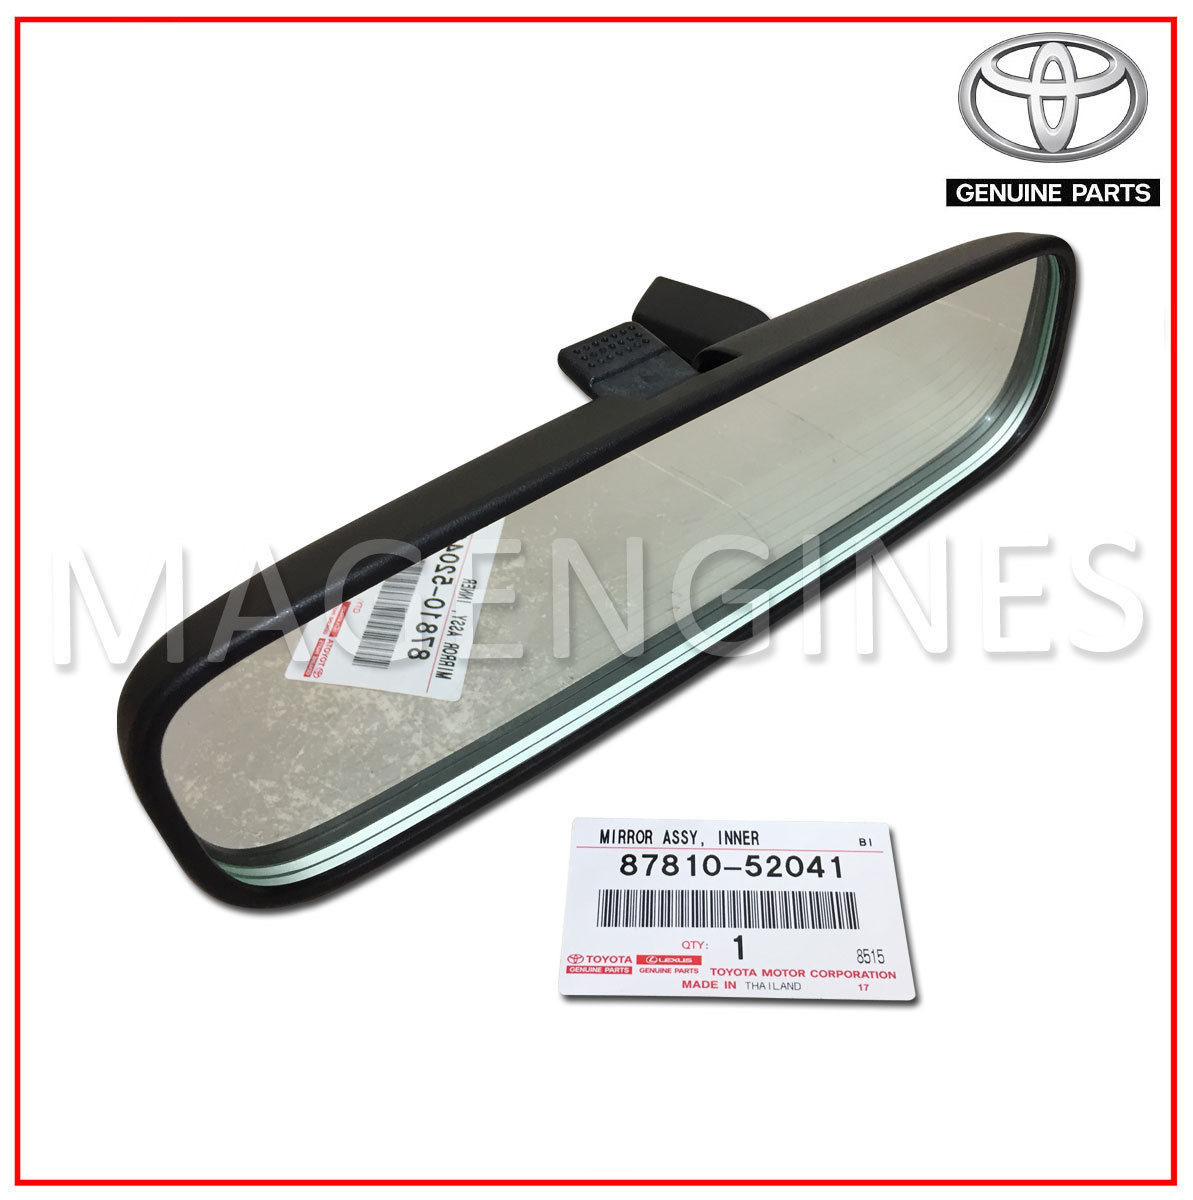 Genuine Toyota 87940-AA110-J1 Rear View Mirror Assembly